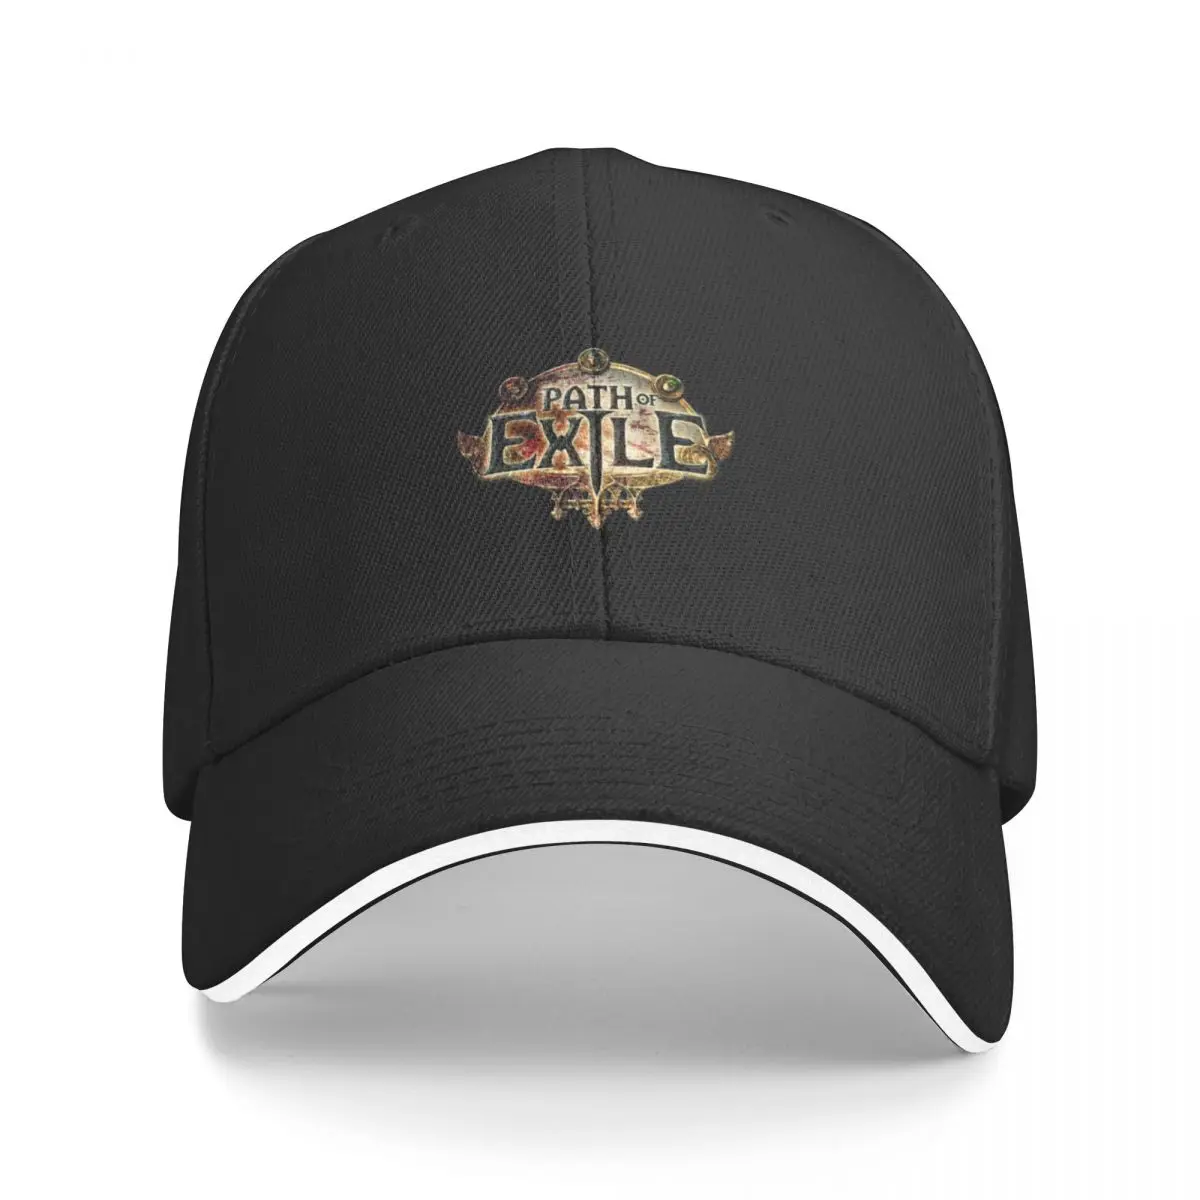 

Path of Exile Essential Baseball Cap Hat Luxury Brand Vintage Hats For Men Women's